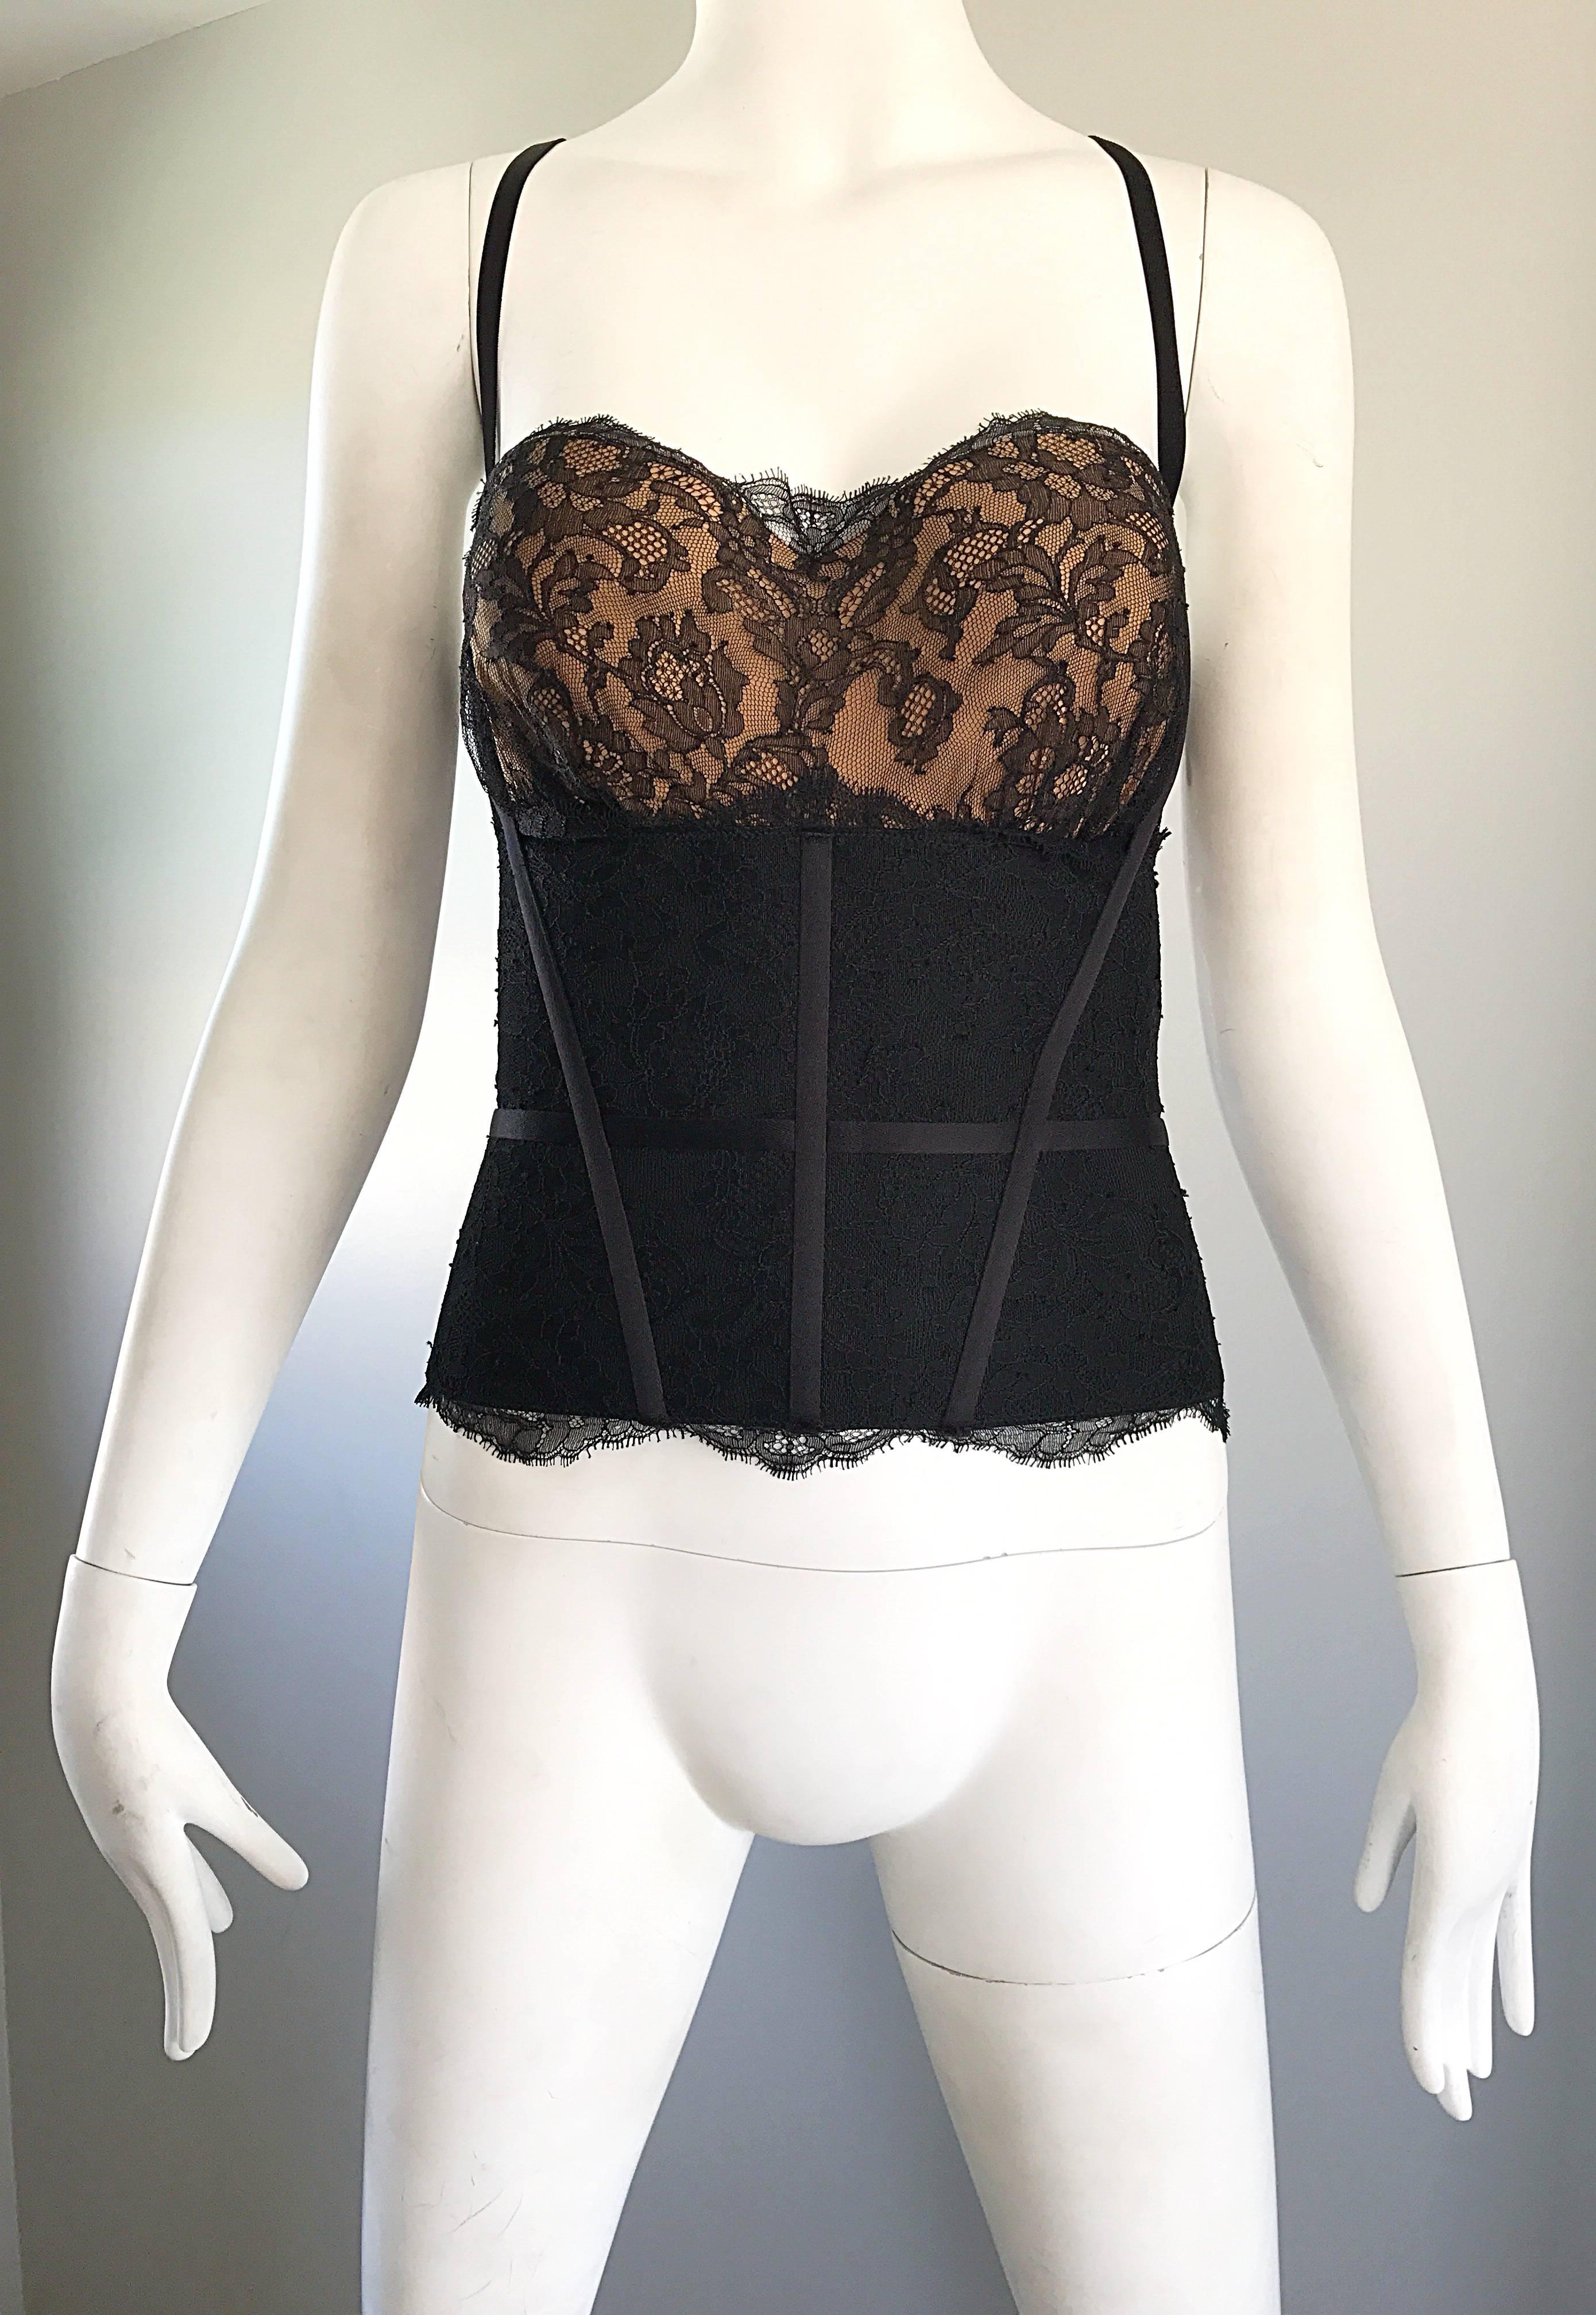 Women's New 1990s La Perla Black and Nude Lace Sexy Vintage 90s Bustier Corset Top For Sale